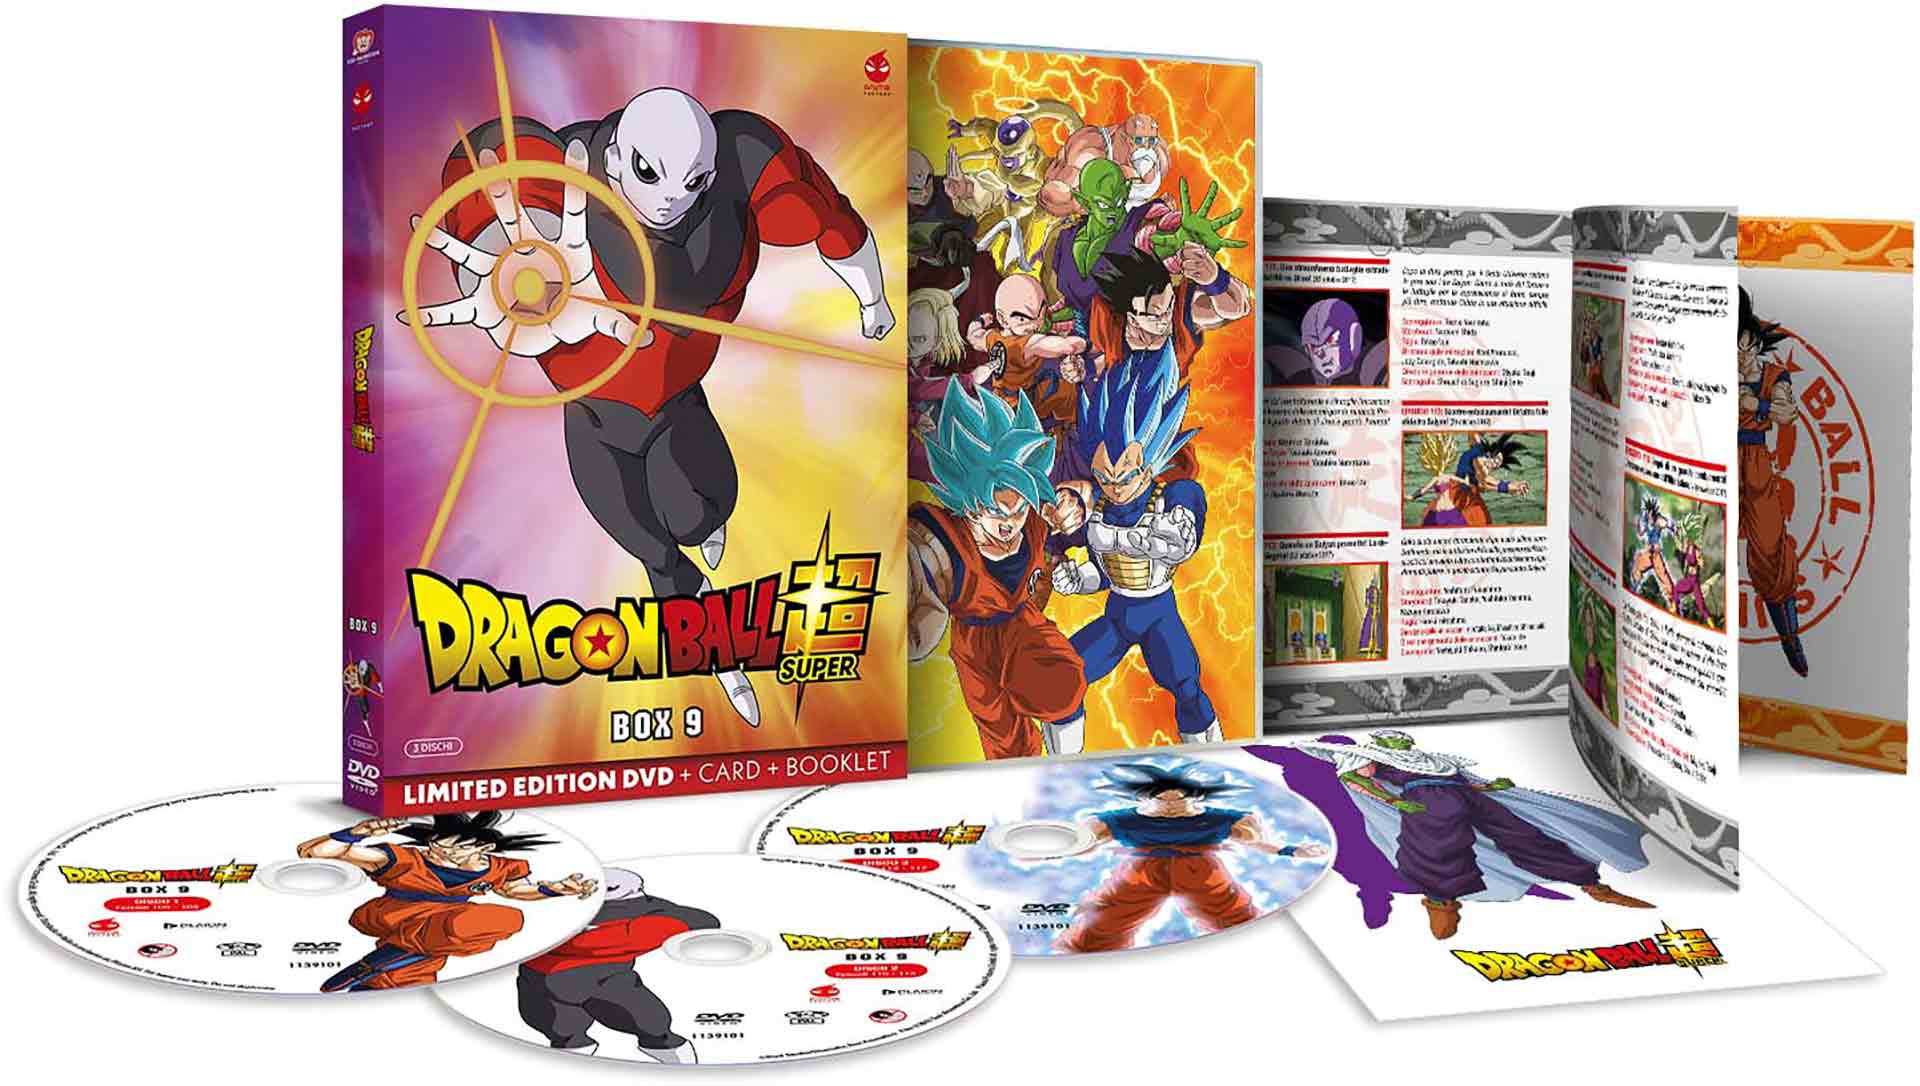 Dragon Ball Super - Volume 9 - Limited Edition Anime Factory 3 DVD + Card + Booklet (DVD) Thumbnail 2